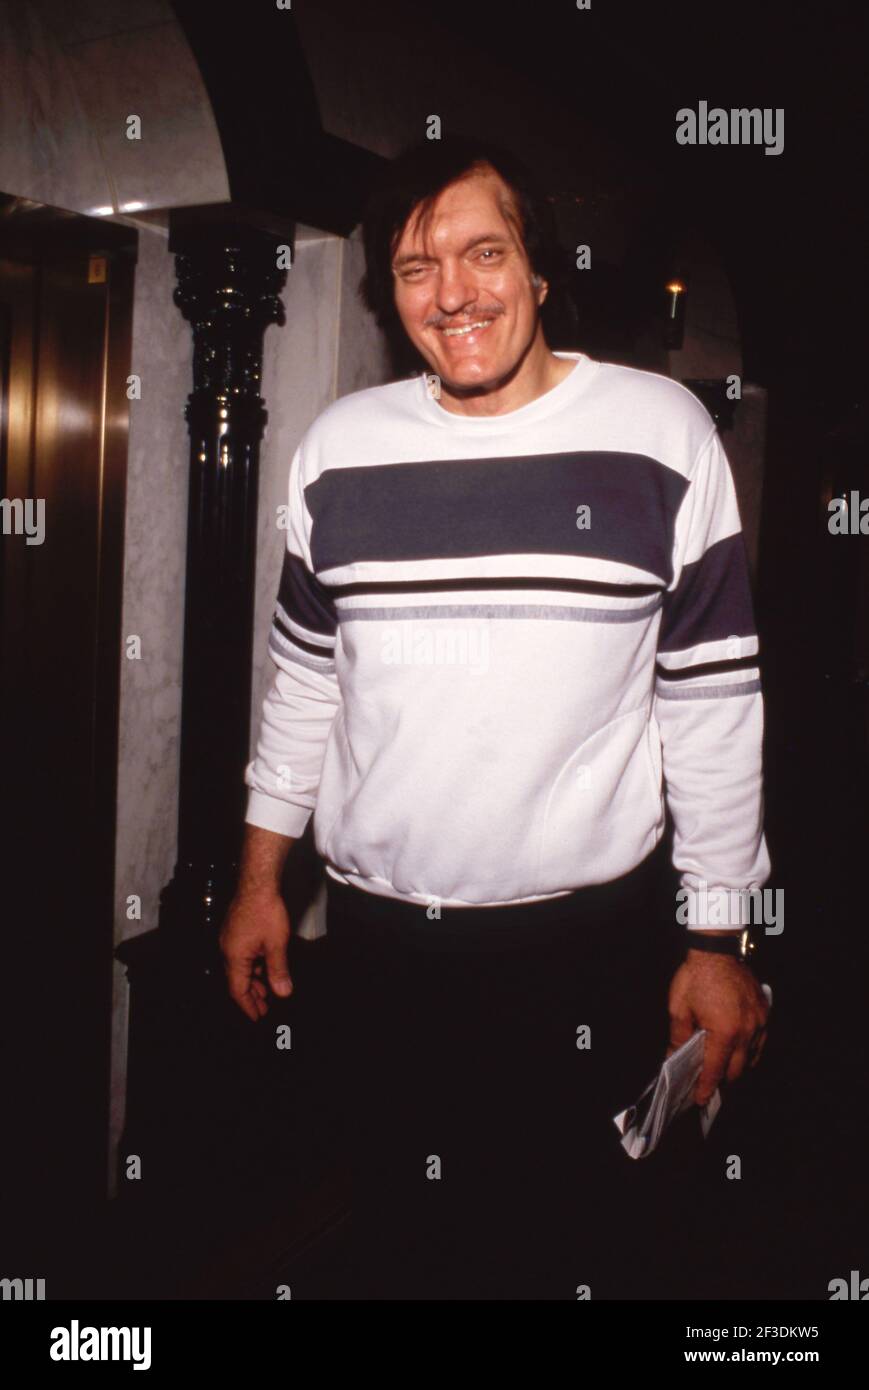 LAS VEGAS - FEBRUARY 7: Actor Richard Kiel attends the 17th Annual NATO/ShoWest Convention on February 7, 1991 at the Bally's Hotel & Casino in Las Vegas Credit: Ralph Dominguez/MediaPunch Stock Photo